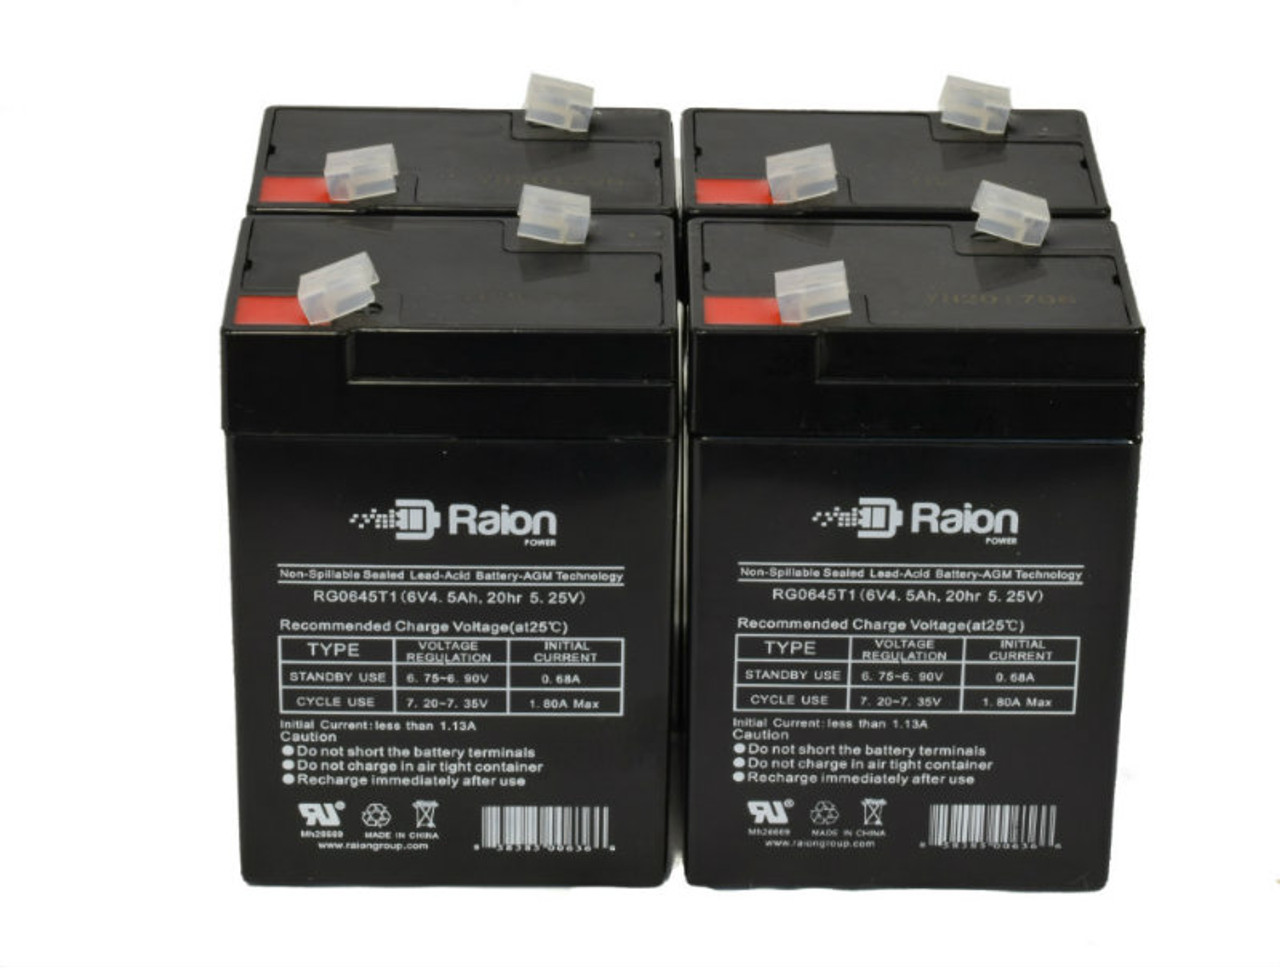 Raion Power 6V 4.5Ah Replacement Emergency Light Battery for Lithonia ELB-06042 - 4 Pack